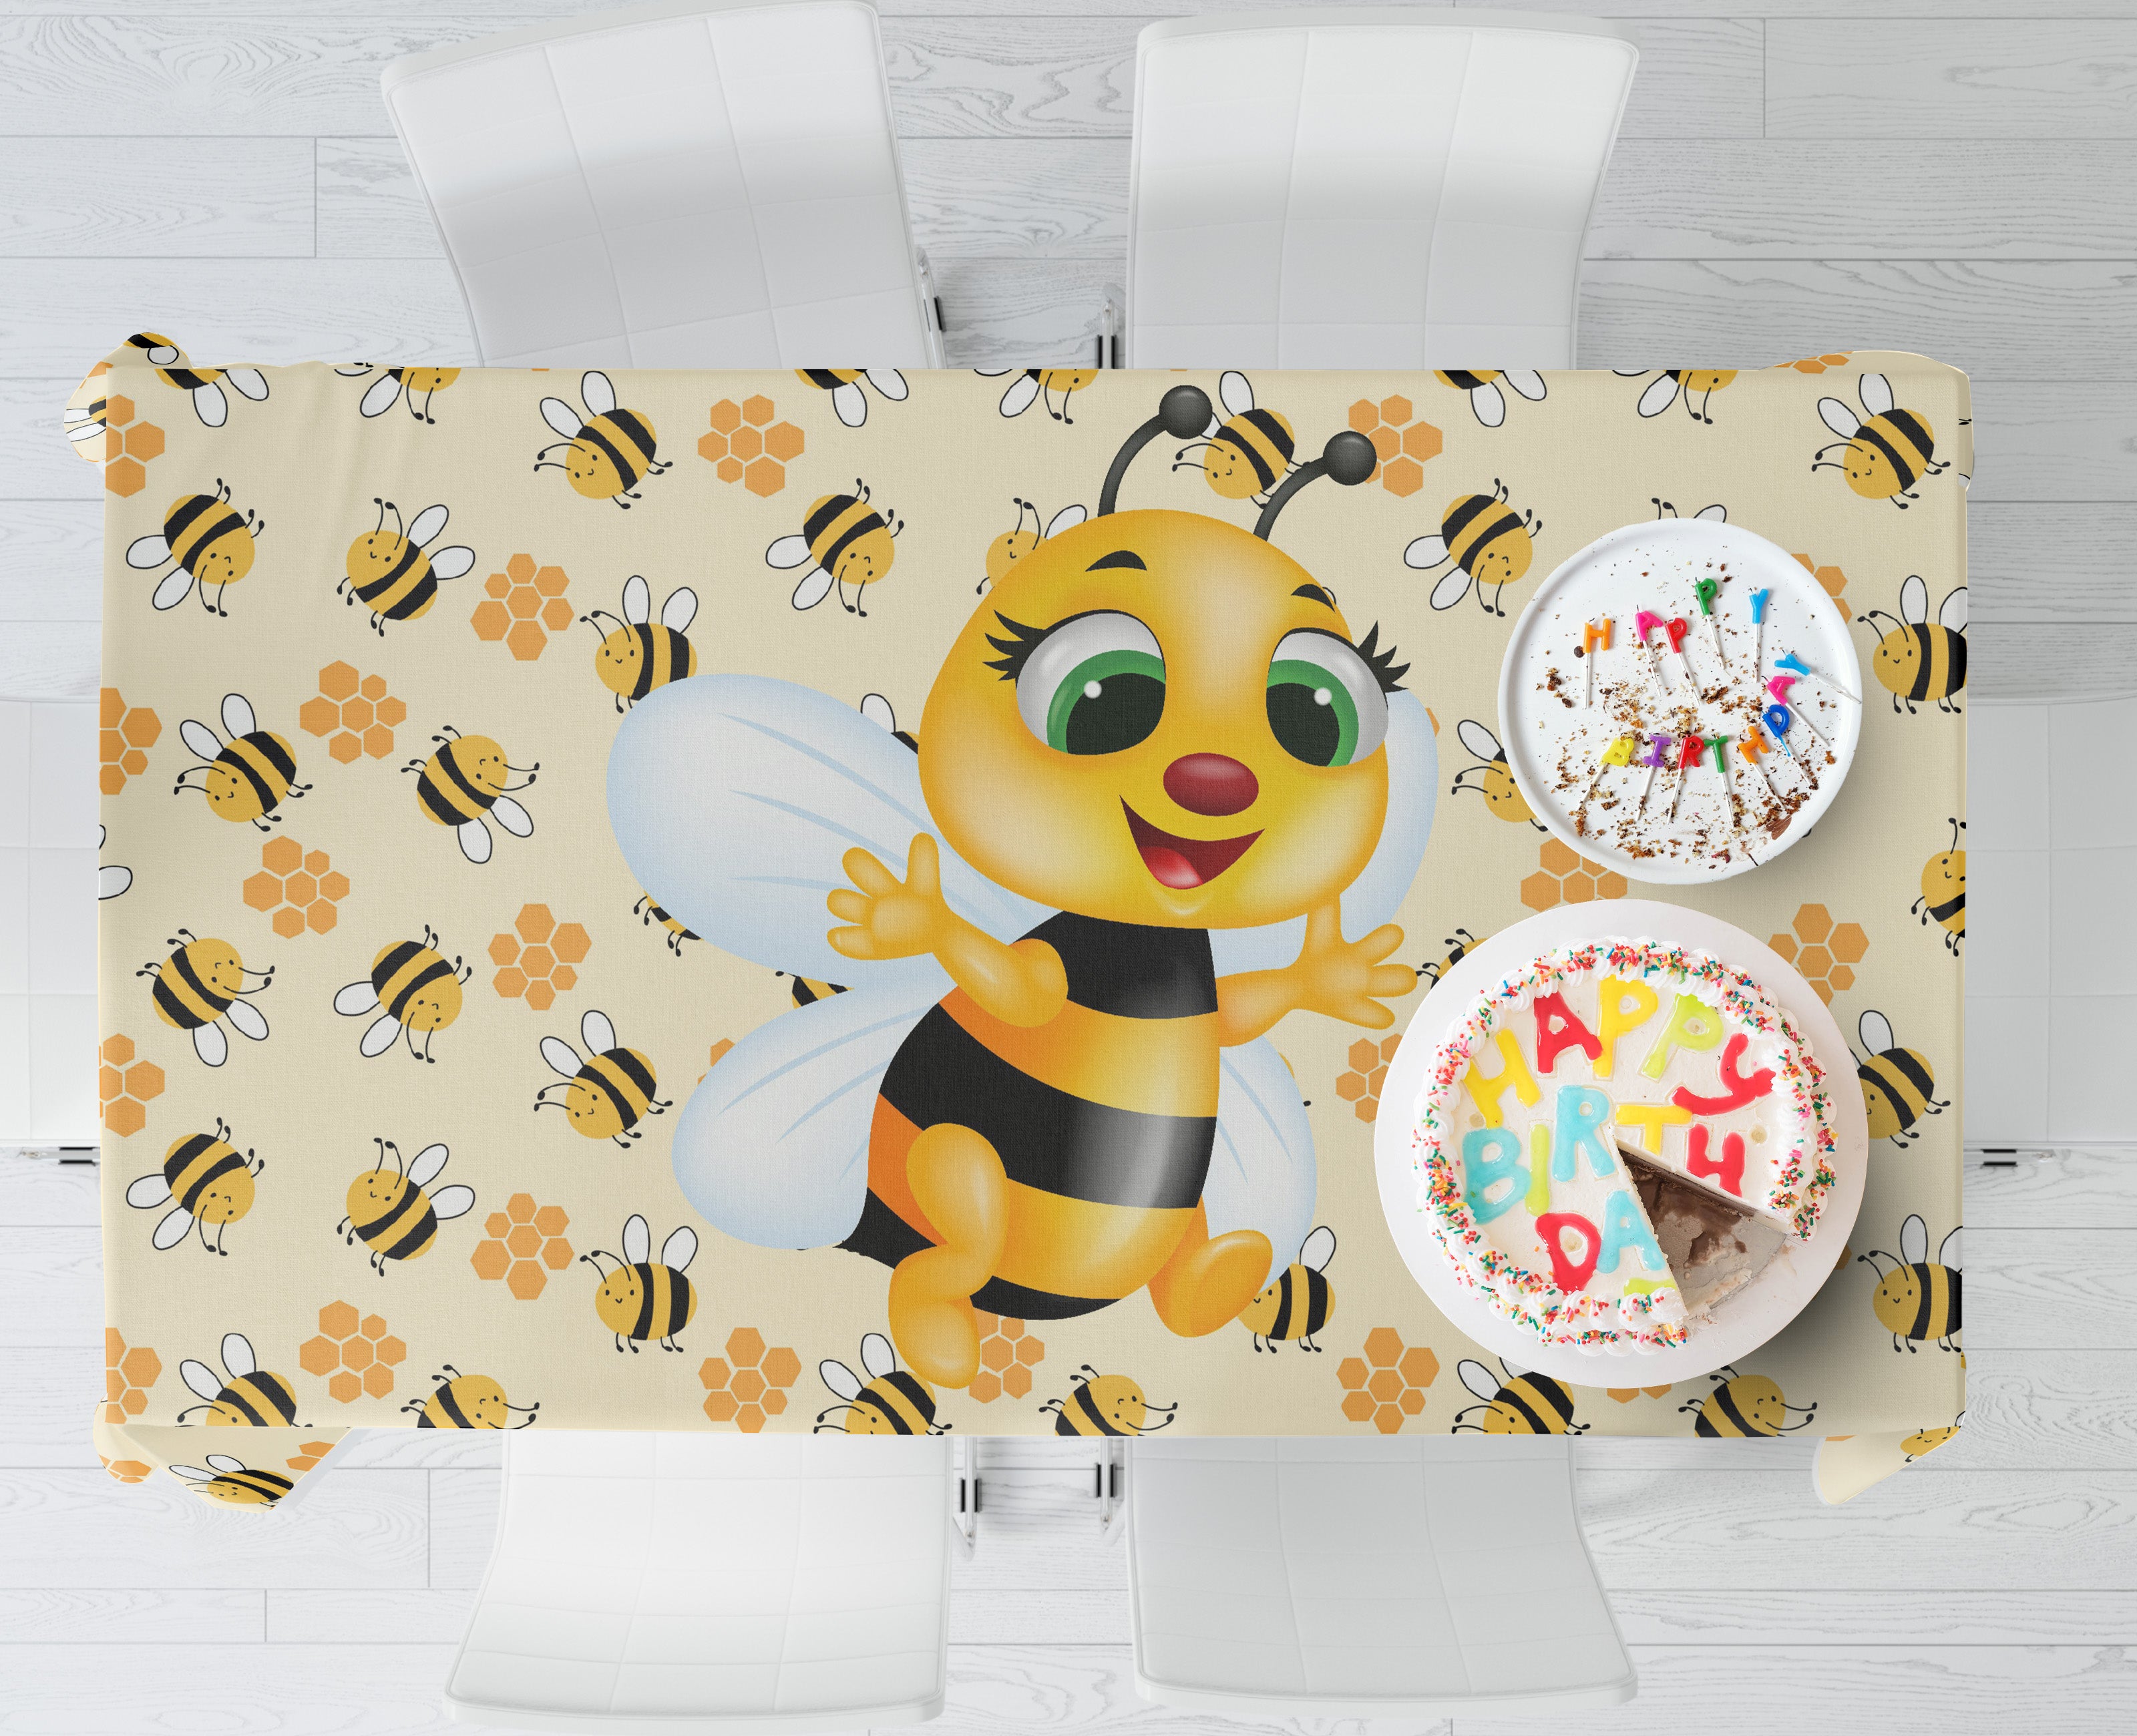 PSI Bumble Bee Theme Cake Tablecover